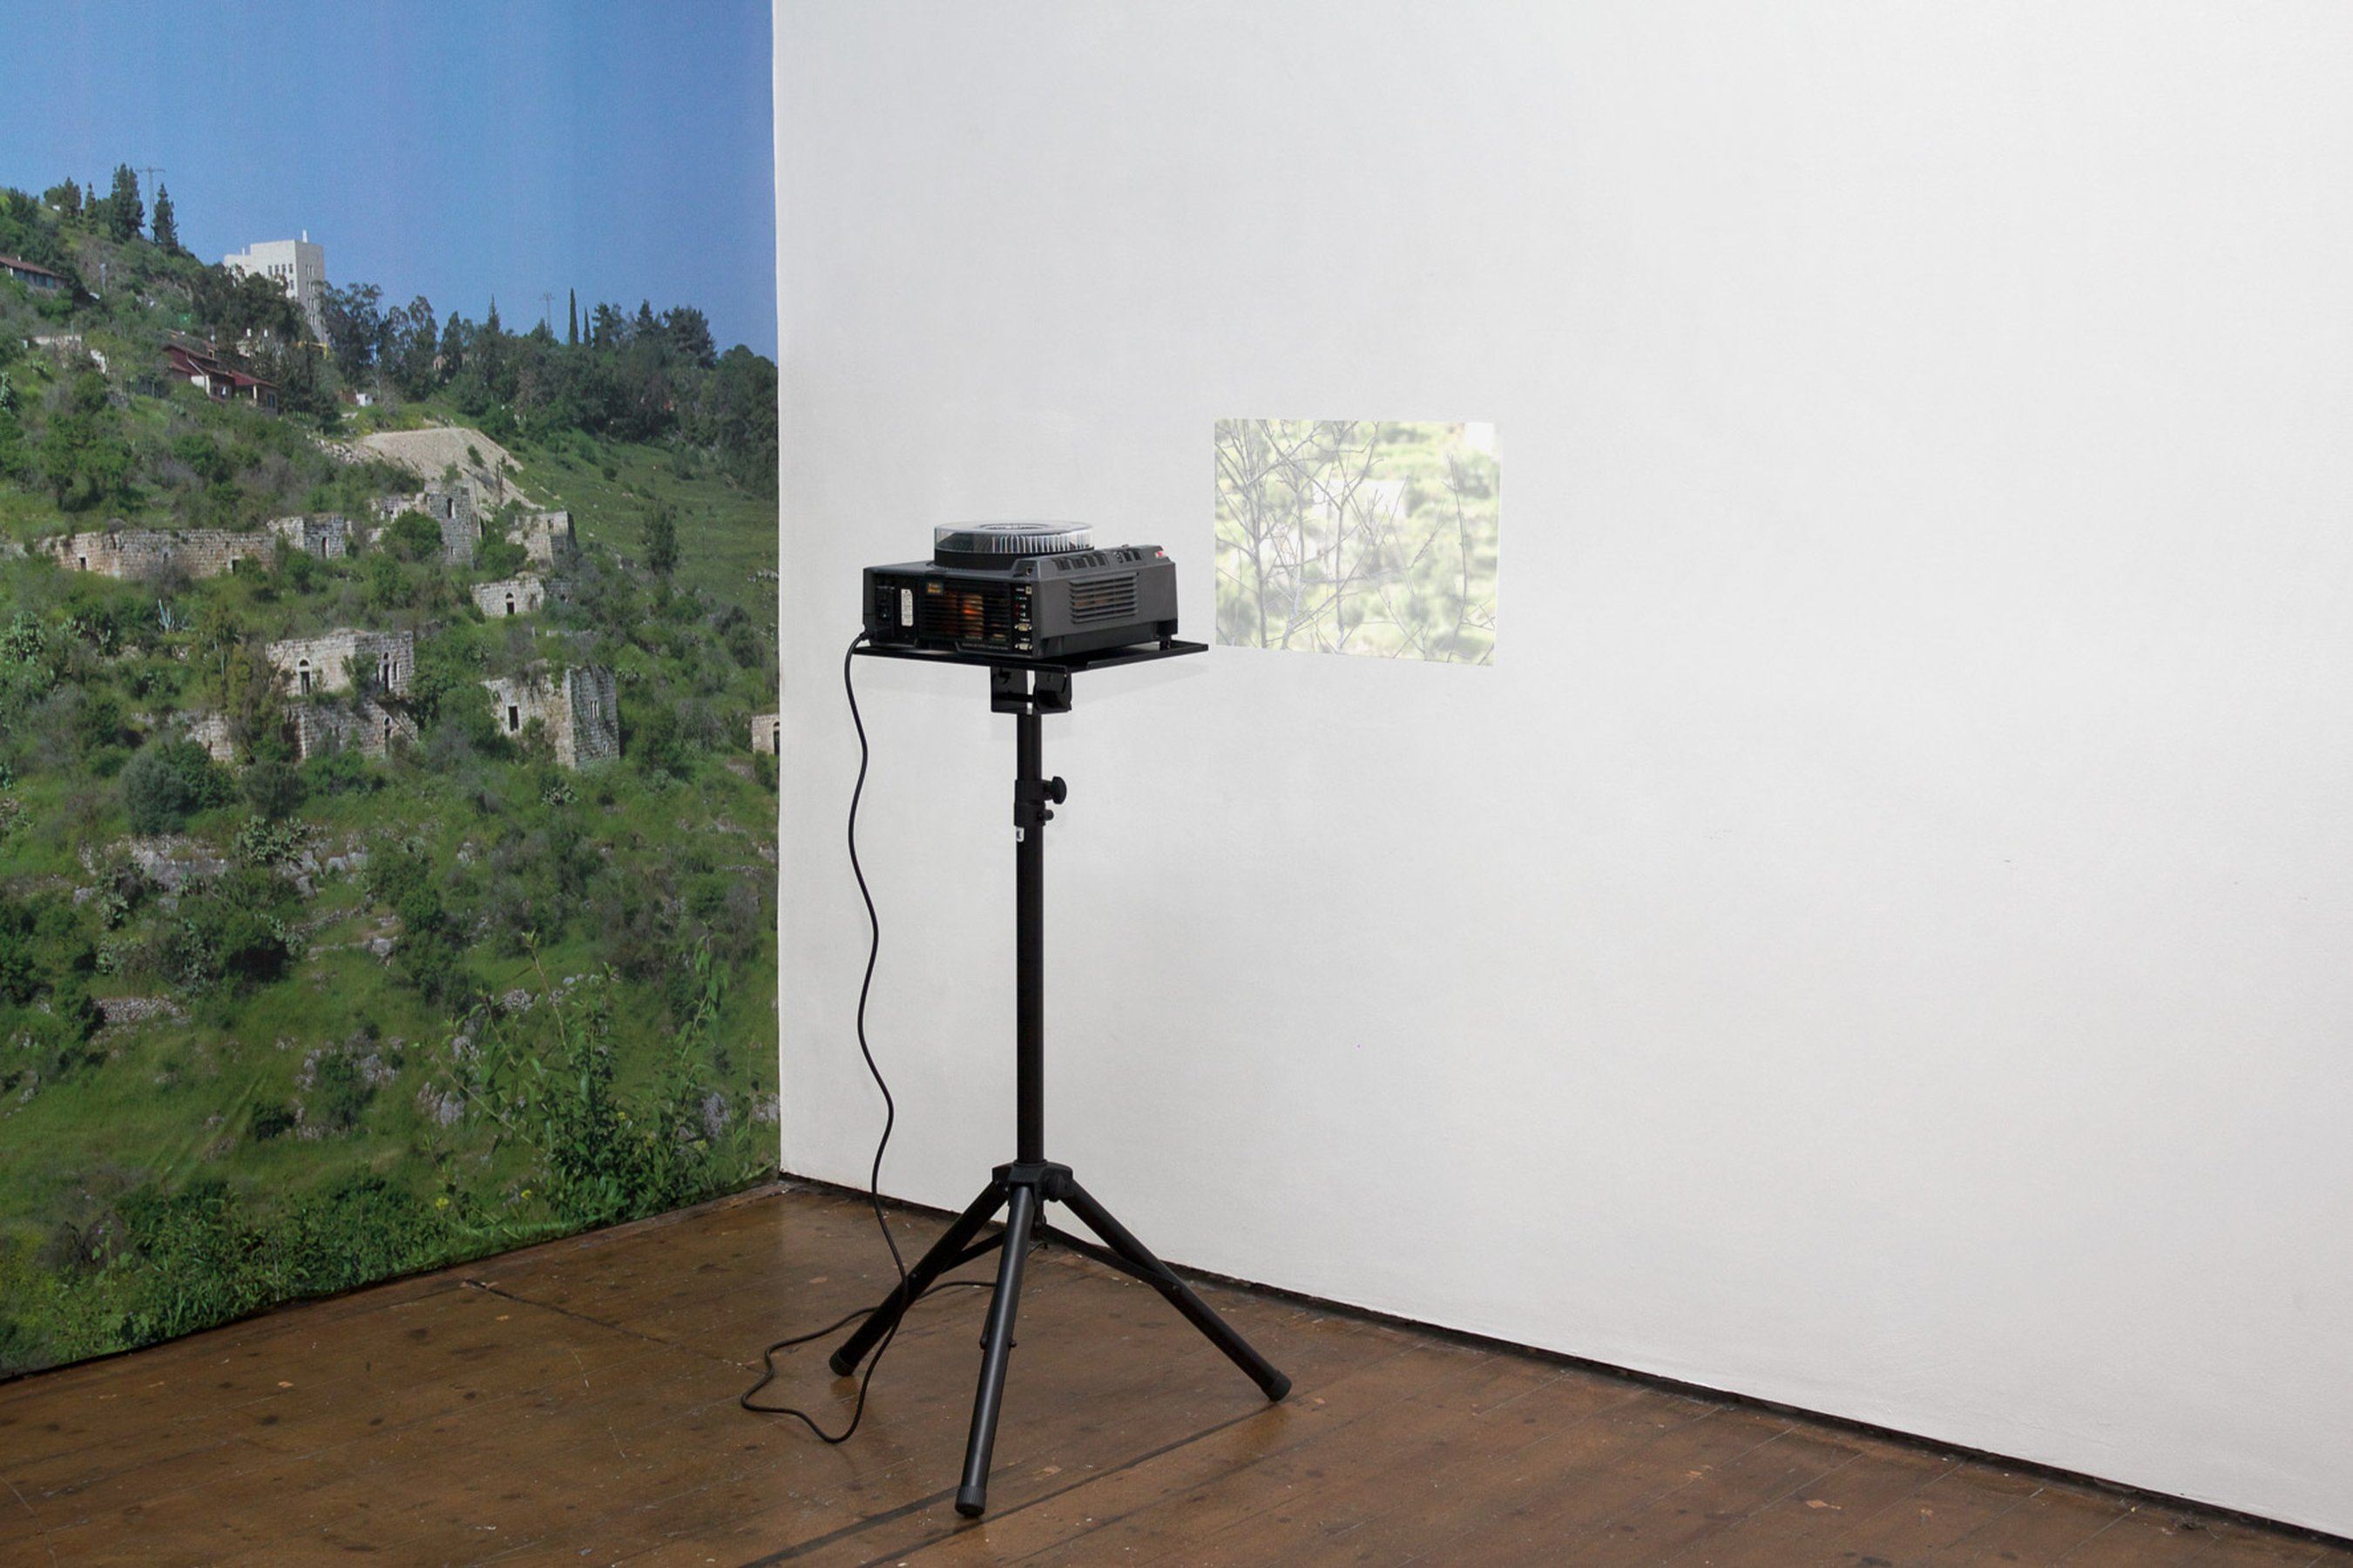 Unmade Film - The Reconnaissance, 2012 - 2013, installation view